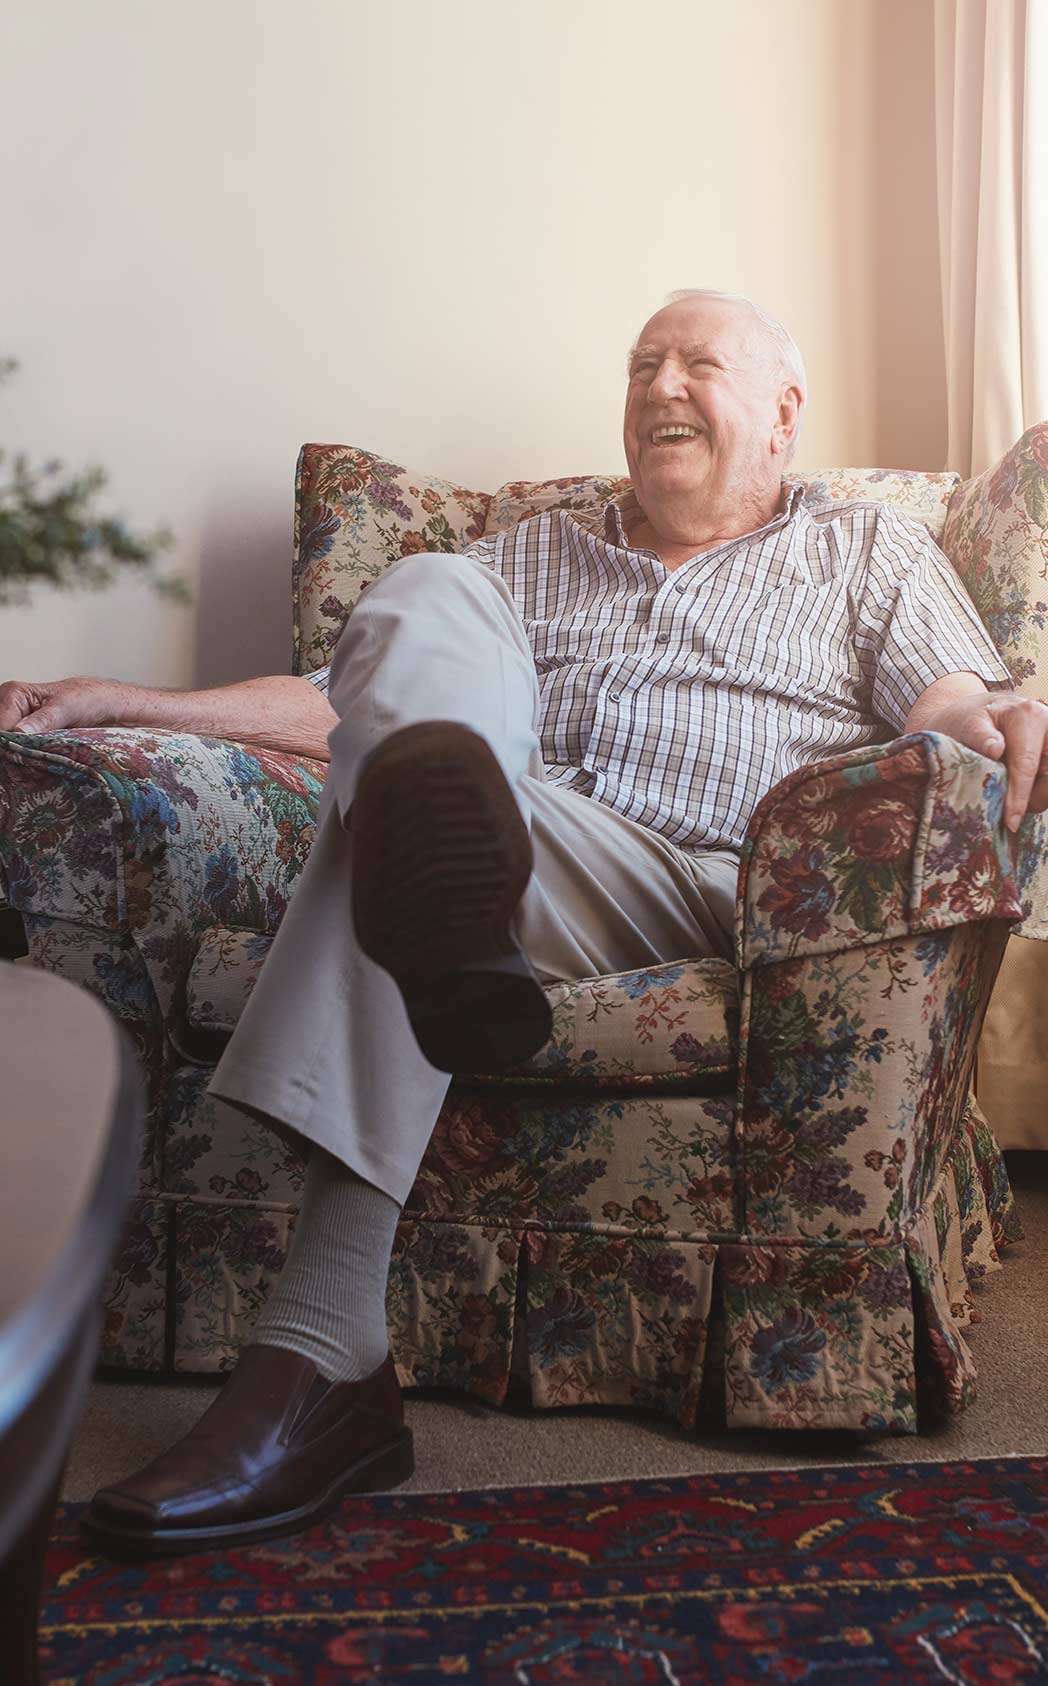 A view of a senior man sitting in a living room armchair with his legs crossed, laughing with the person visiting him.